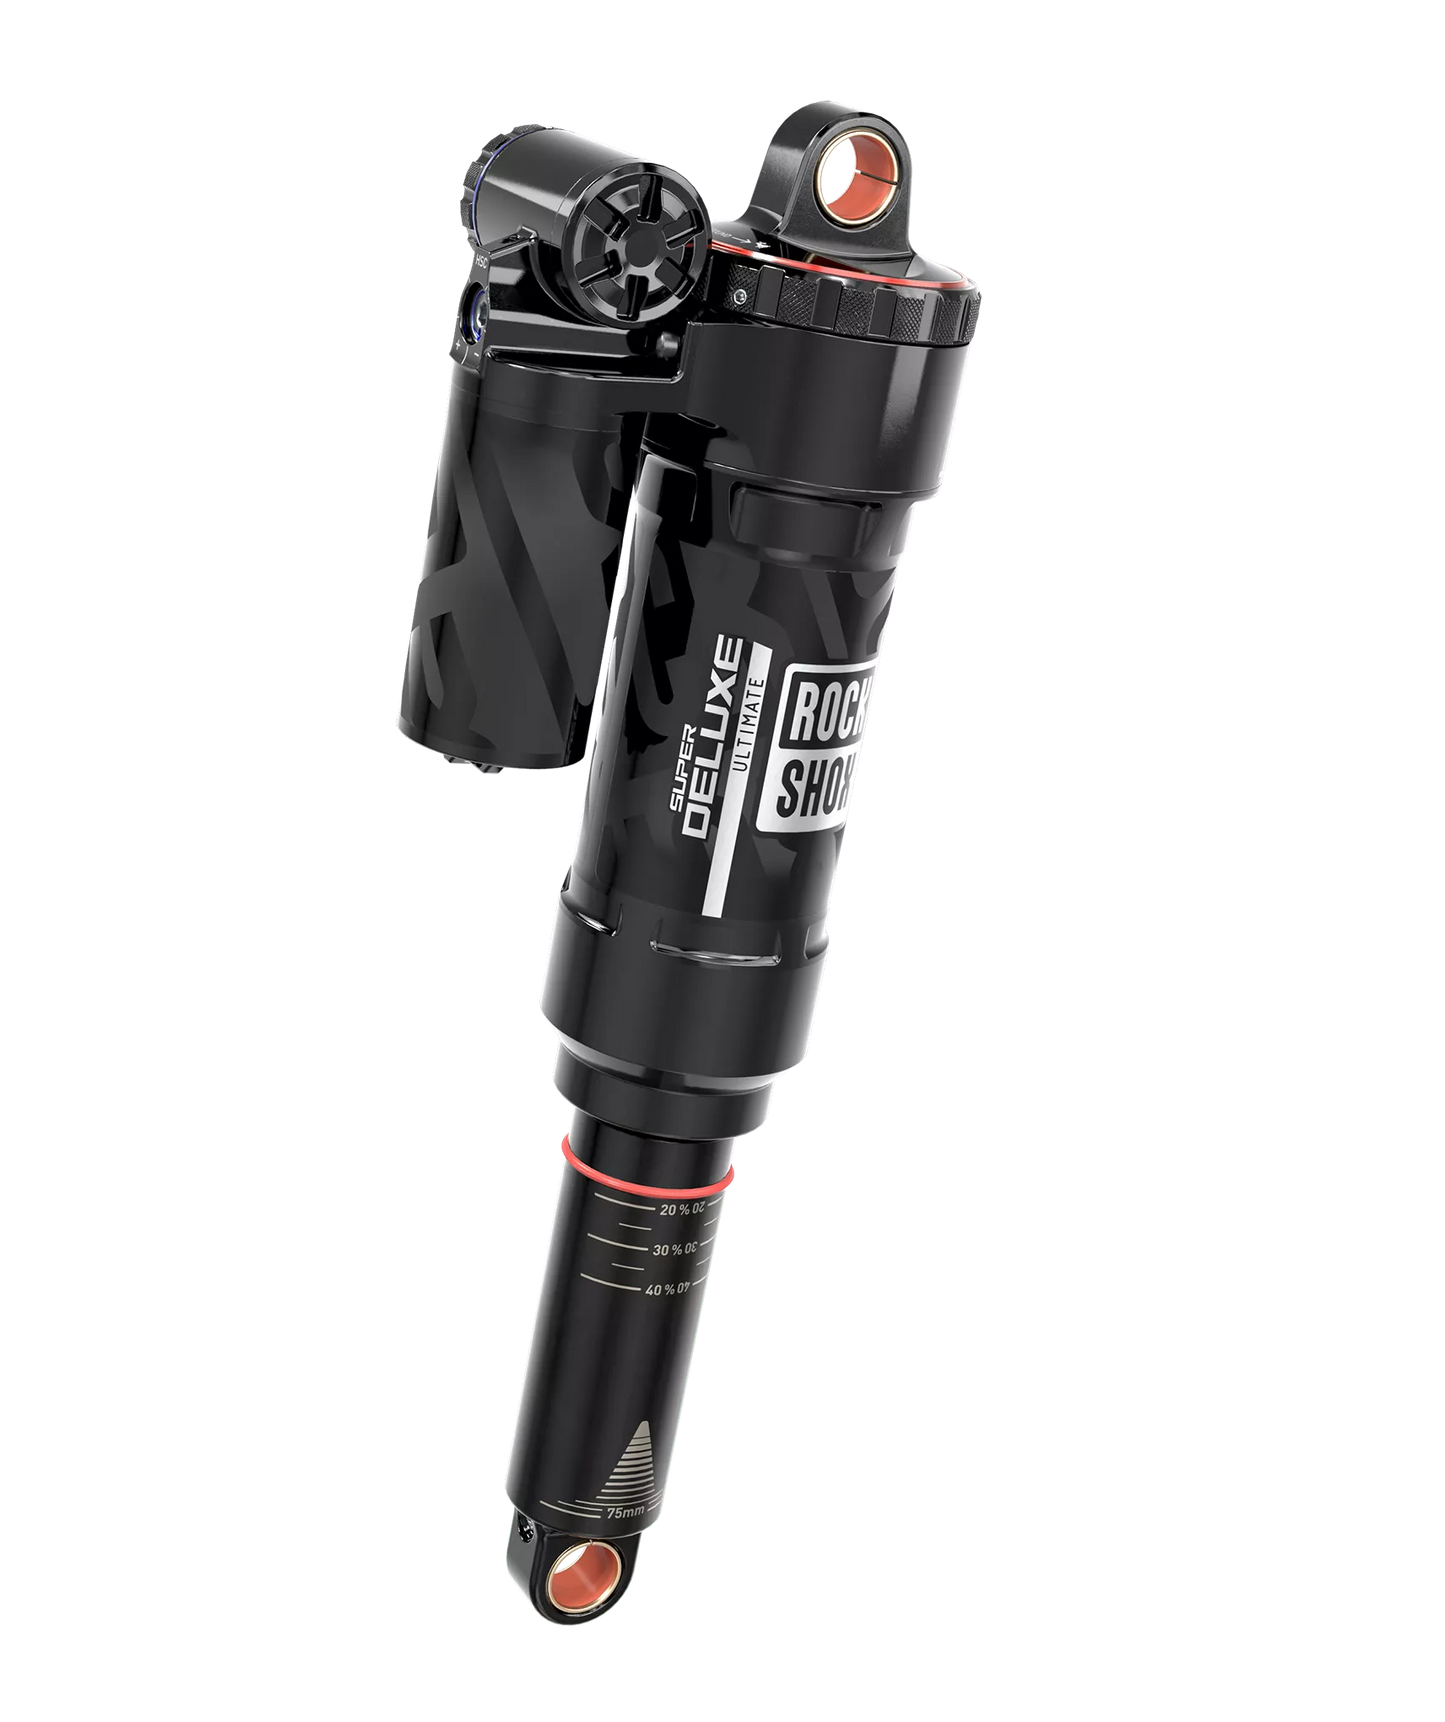 RockShox Super Deluxe Ultimate DH RC2, HBO